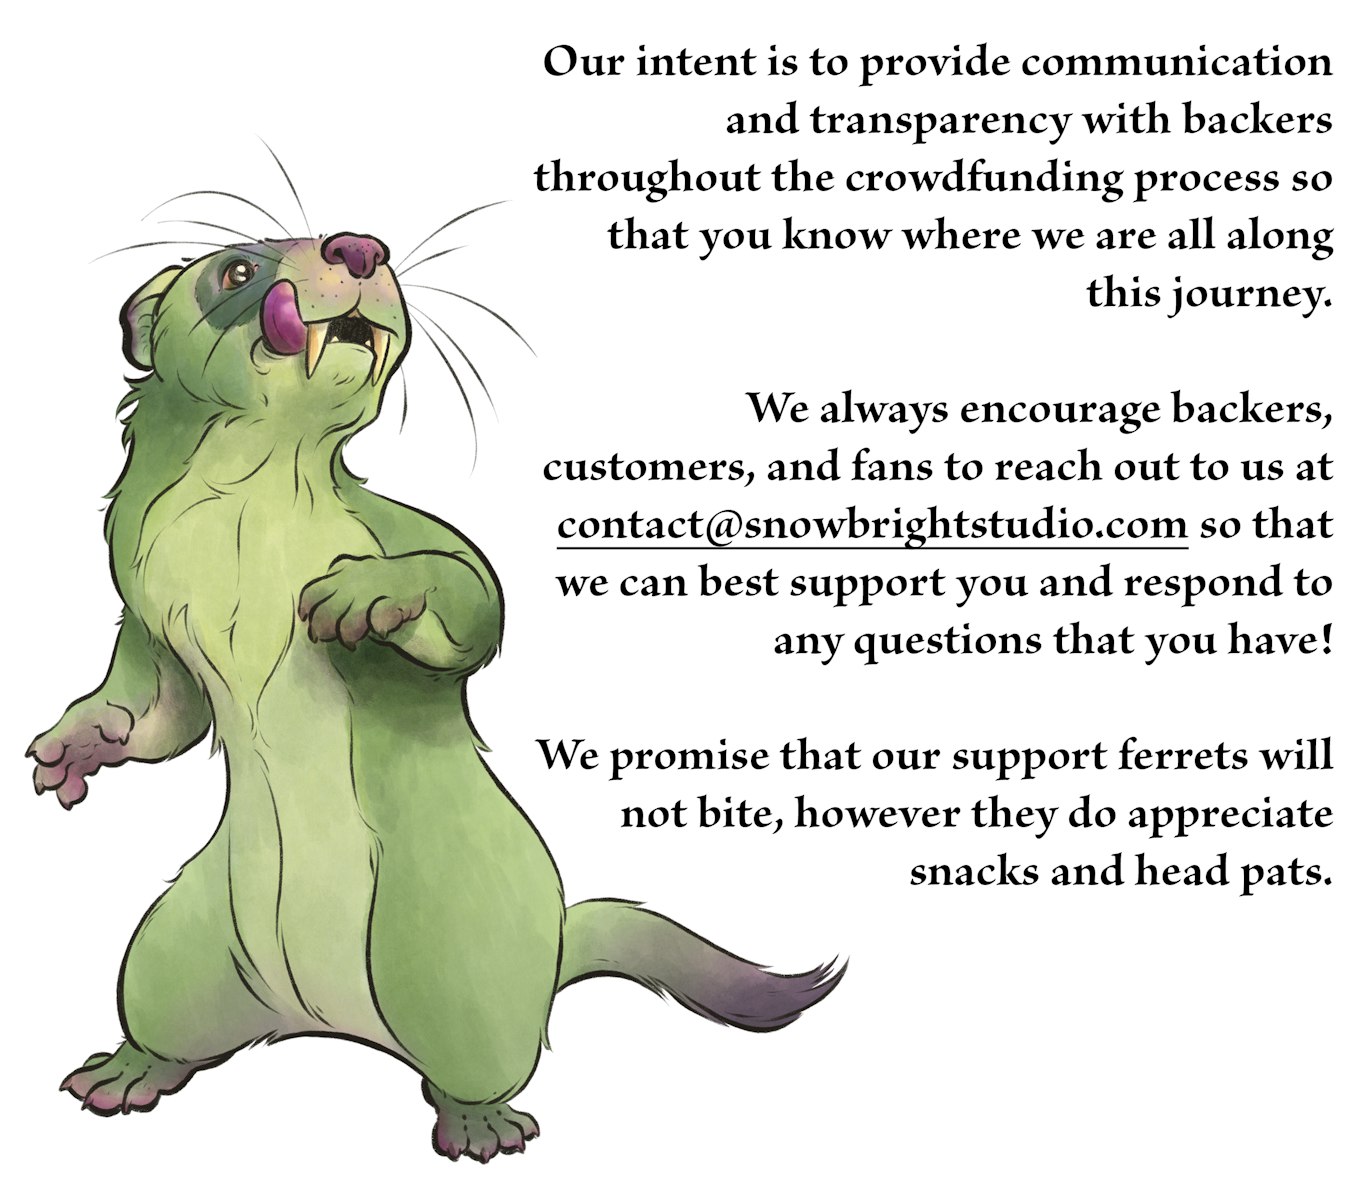 Our intent is to provide communication and transparency with backers throughout the crowdfunding process so that you know where we are all along this journey.   We always encourage backers, customers, and fans to reach out to us at contact@snowbrightstudio.com so that we can best support you and respond to any questions that you have!  We promise that our support ferrets will not bite, however they do appreciate snacks and head pats.